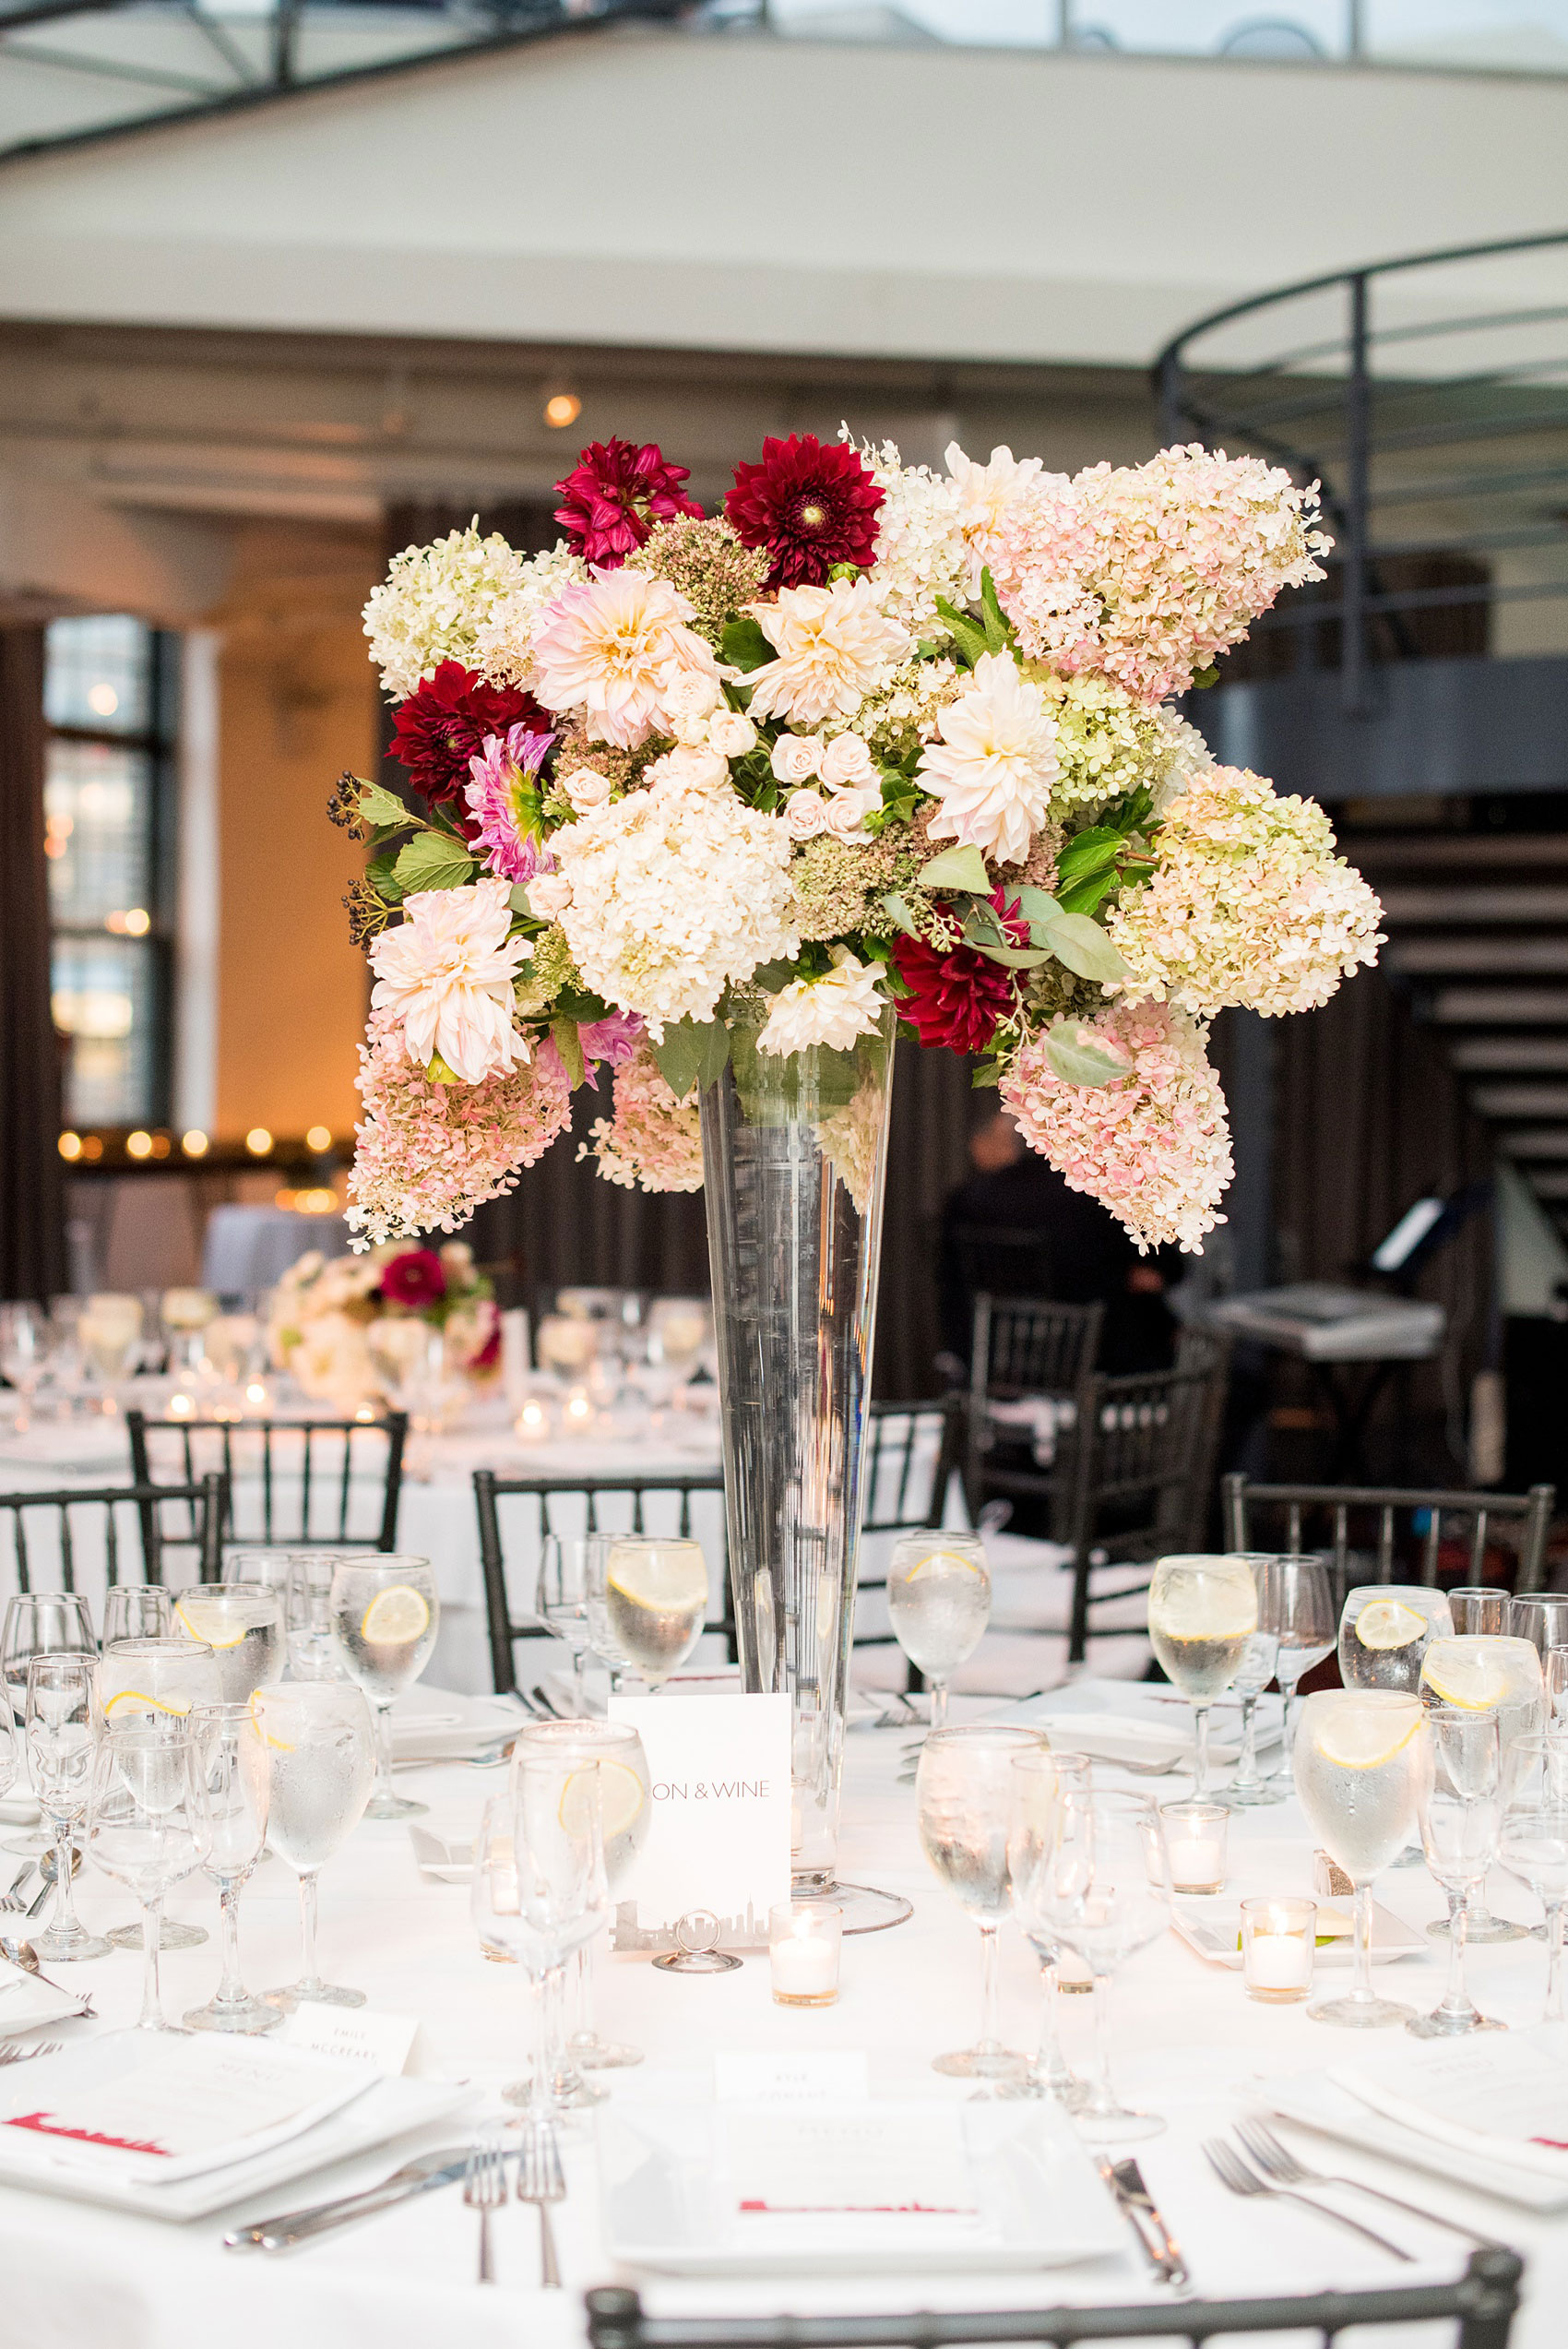 Photos of a NYC wedding venue, Tribeca Rooftop, by Mikkel Paige Photography. This ceremony and reception location has an outdoor space overlooking the Manhattan skyline. These pictures will provide inspiration in New York! The couple dreamed of getting married in this awesome city with flowers and colors of fall. Click through for more details from this beautiful celebration! #TribecaRooftop #NYCVenues #MikkelPaige #NYCwedding #NYCskyline #NYCWeddingPhotos #NYCWeddingPhotography 